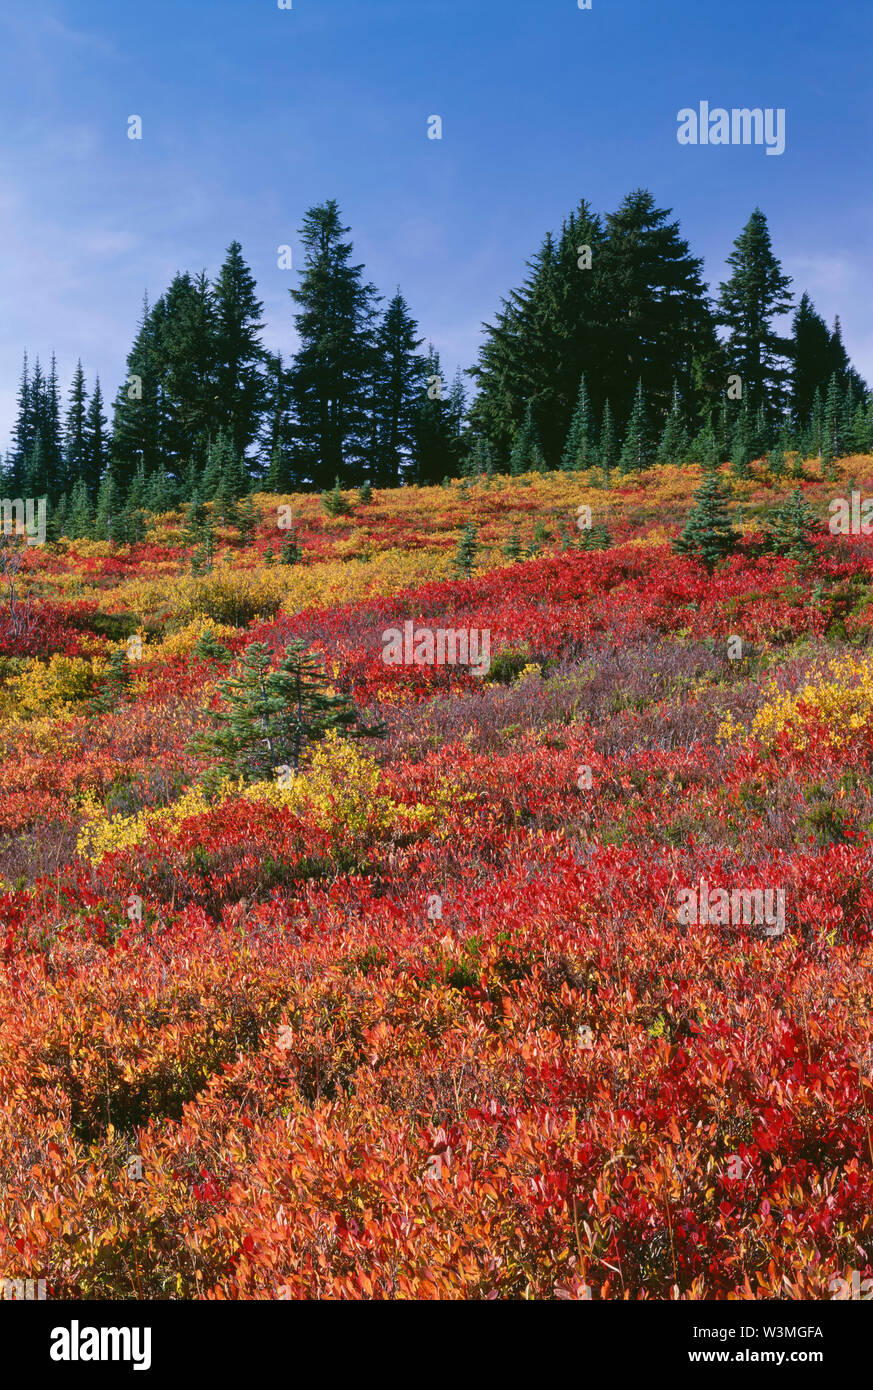 USA, Washington, Mt. Rainier National Park, Huckleberry and blueberry with vibrant autumn color and distant evergreen trees, Paradise area. Stock Photo